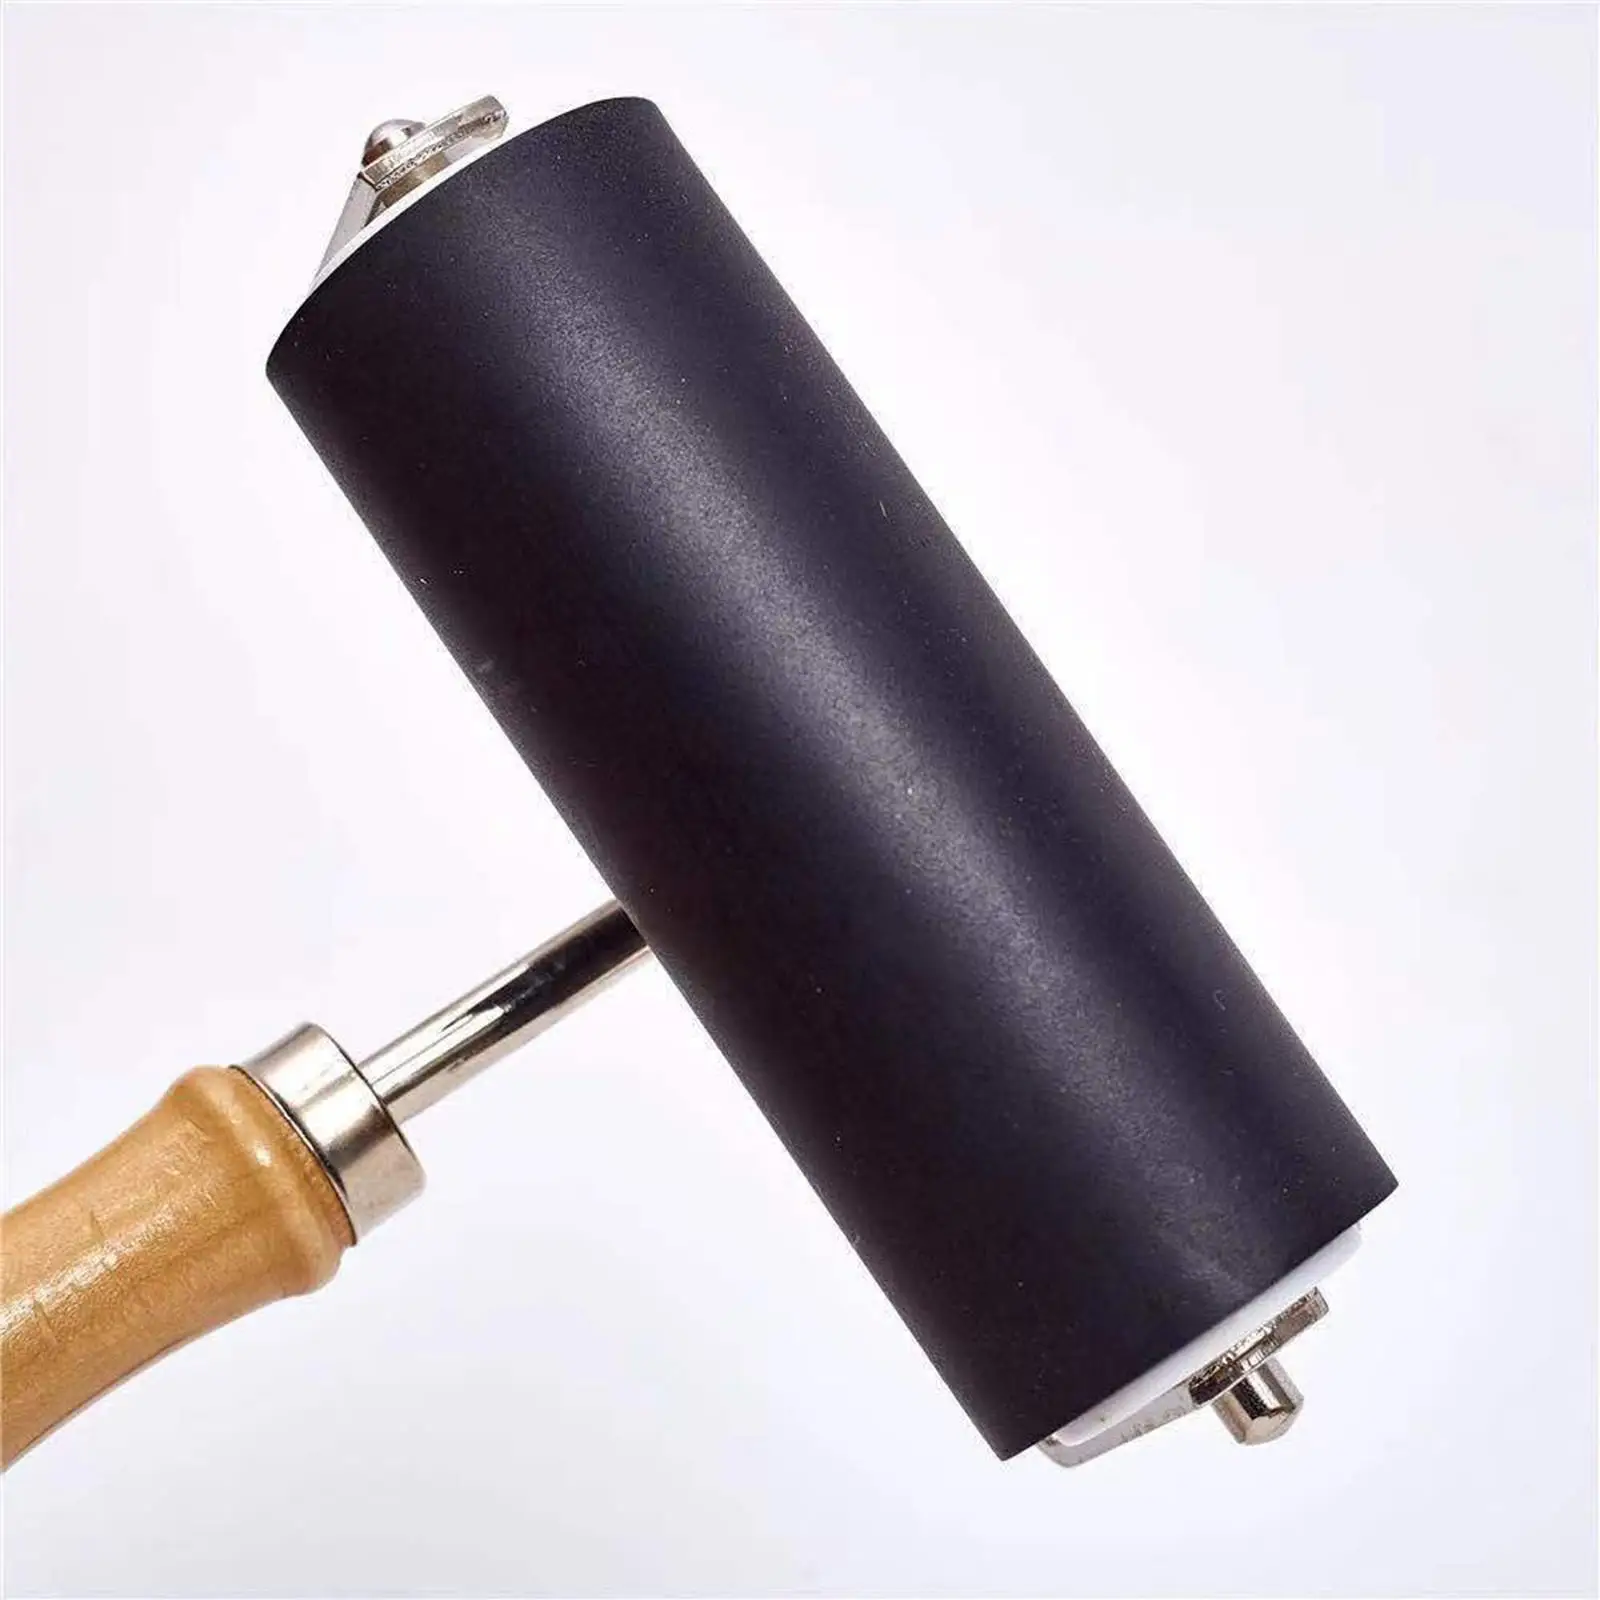 4 Inch Rubber Brayer Roller for Printmaking, Printing, Oil Painting,Stamping